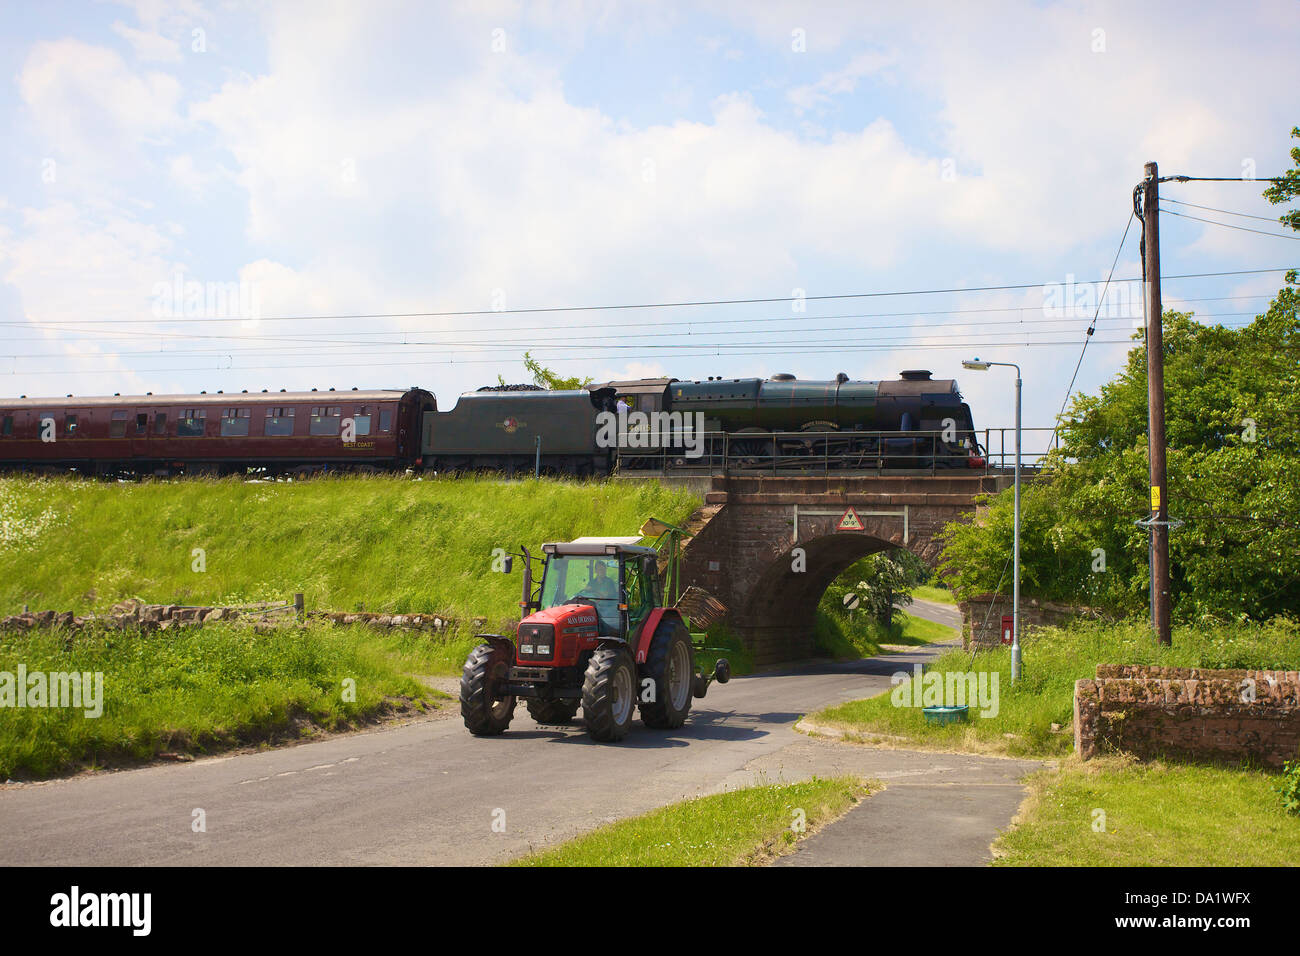 LMS Royal Scot Class 6115 Scots Guardsman steam train at Plumpton on the West Coast Main Line Railway with tractor. Stock Photo